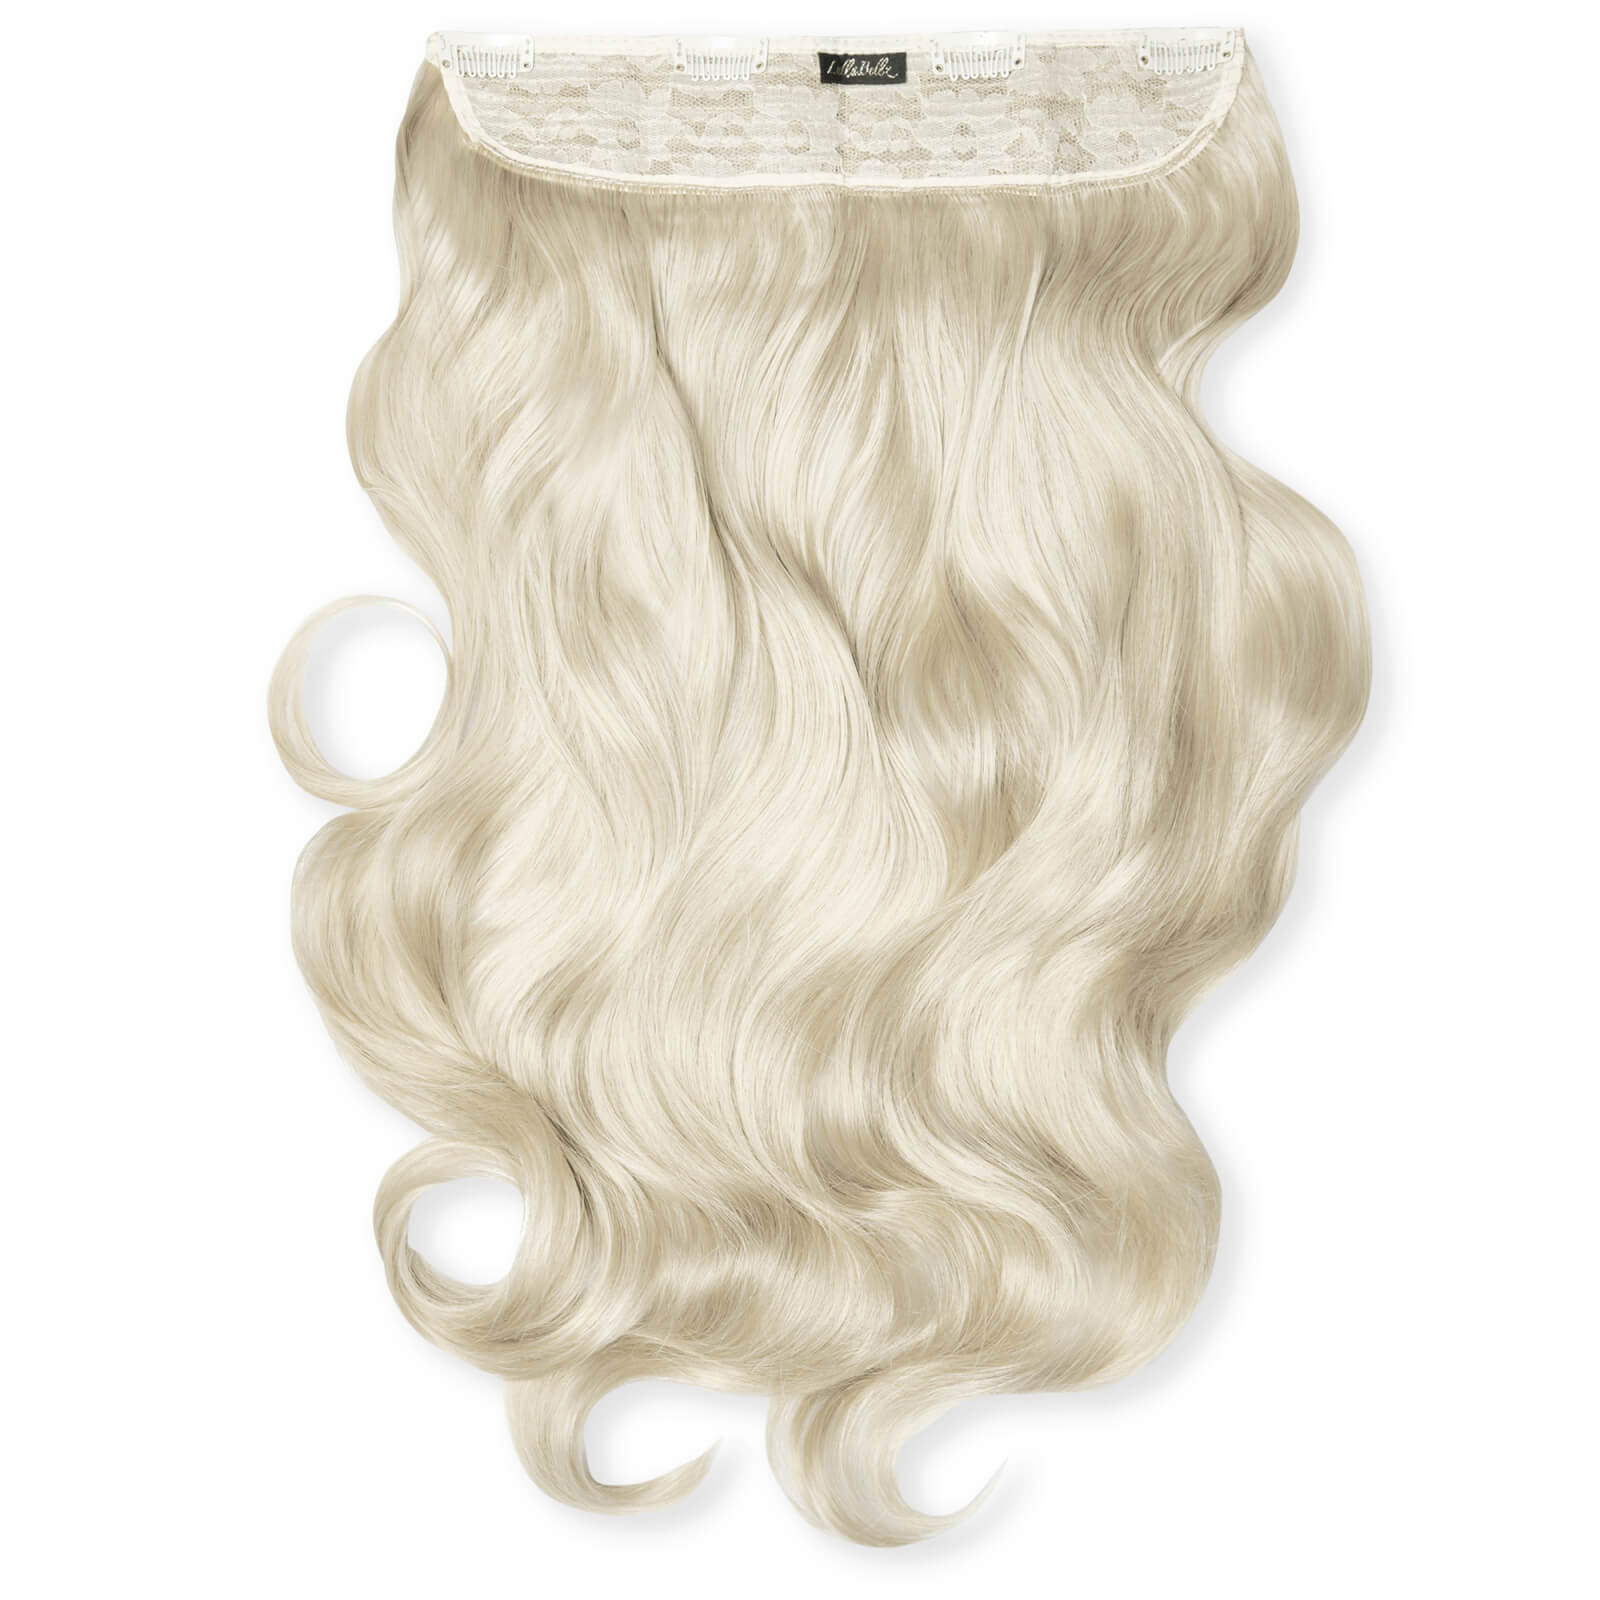 Image of LullaBellz Thick 20 1-Piece Curly Clip in Hair Extensions (Various Colours) - Bleach Blonde